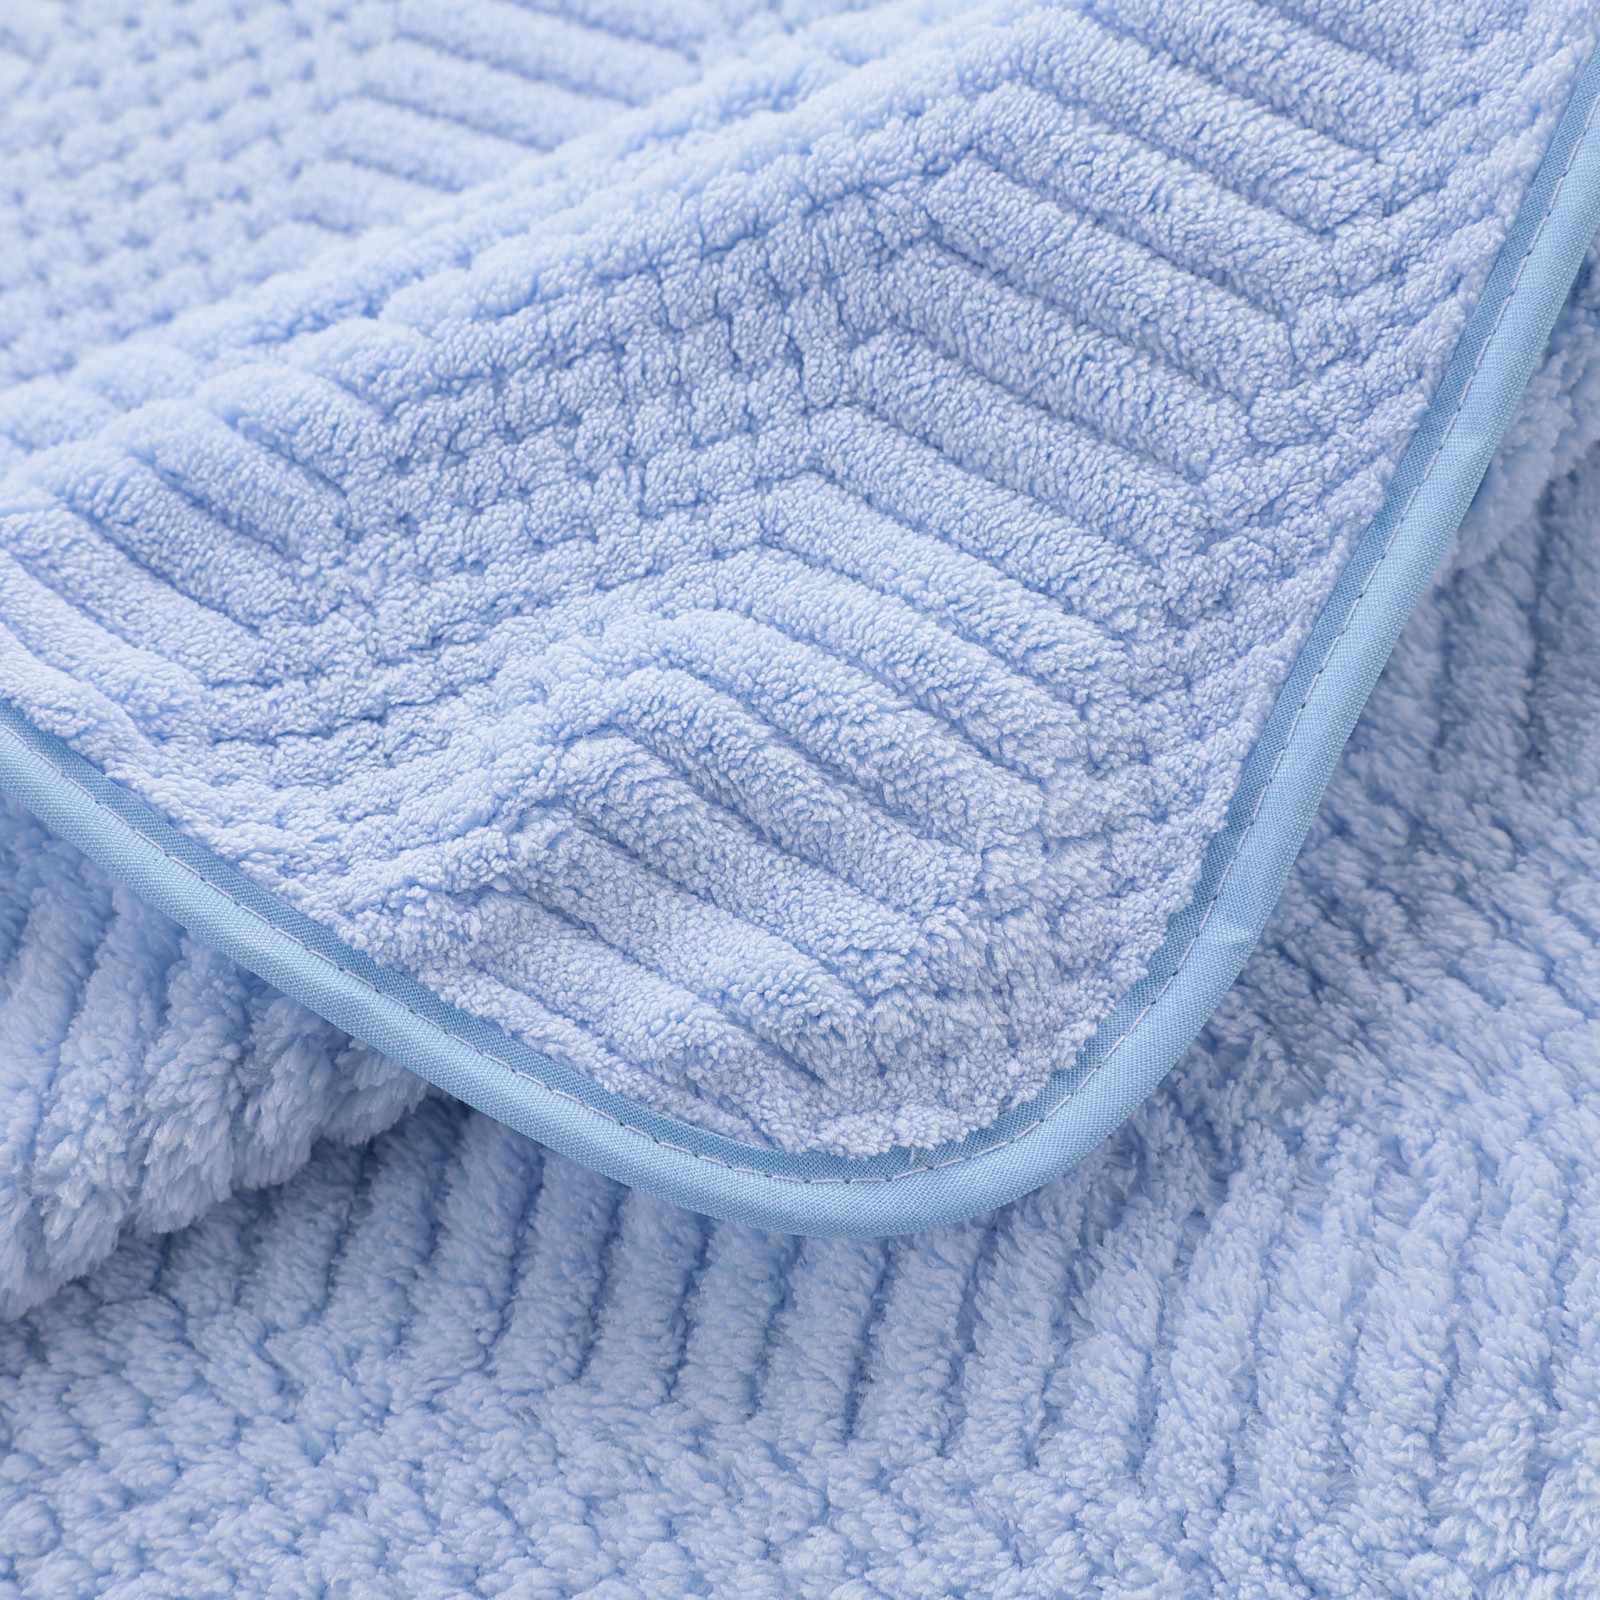 Kuber Industries Bath Towel For Men, Women|280 GSM|Extra Soft & Fade Resistant|Polyester Towels For Bath|Waffle Texture|Bathing Towel, Bath Sheet (Blue)